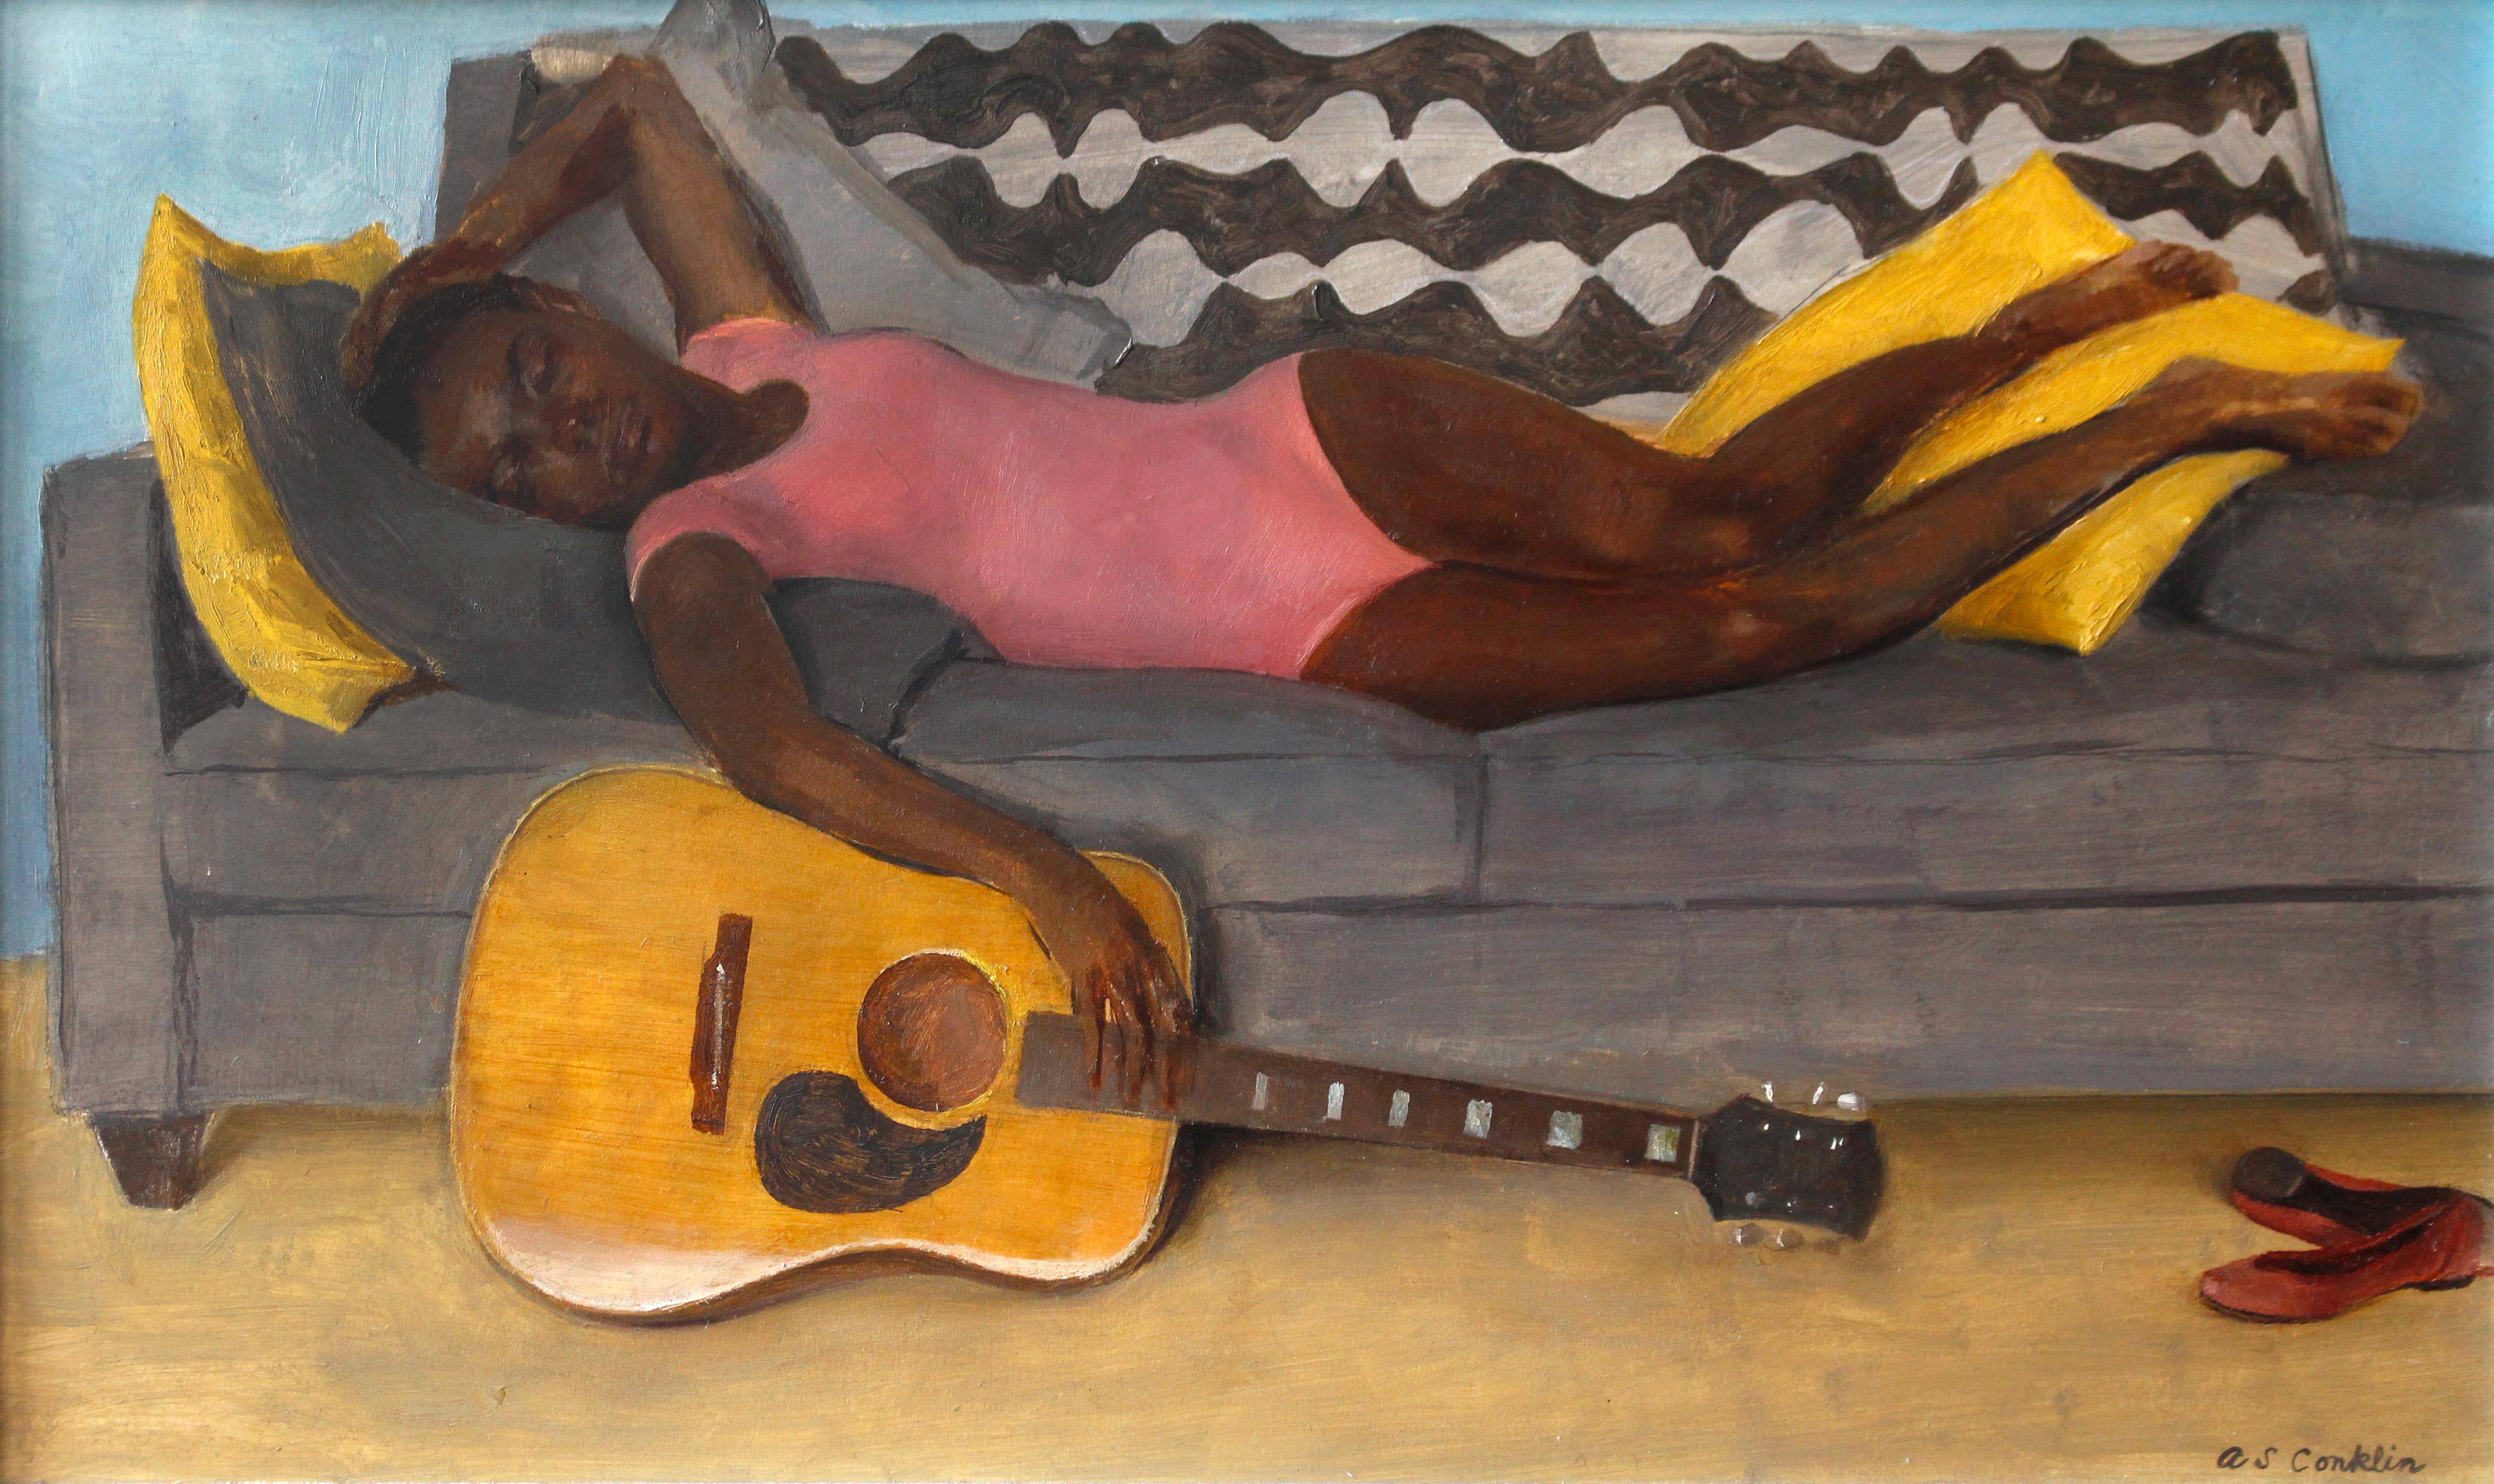 Andrew S. Conklin Portrait Painting - Nina Reclining with Guitar - original female realist still life portraiture oil